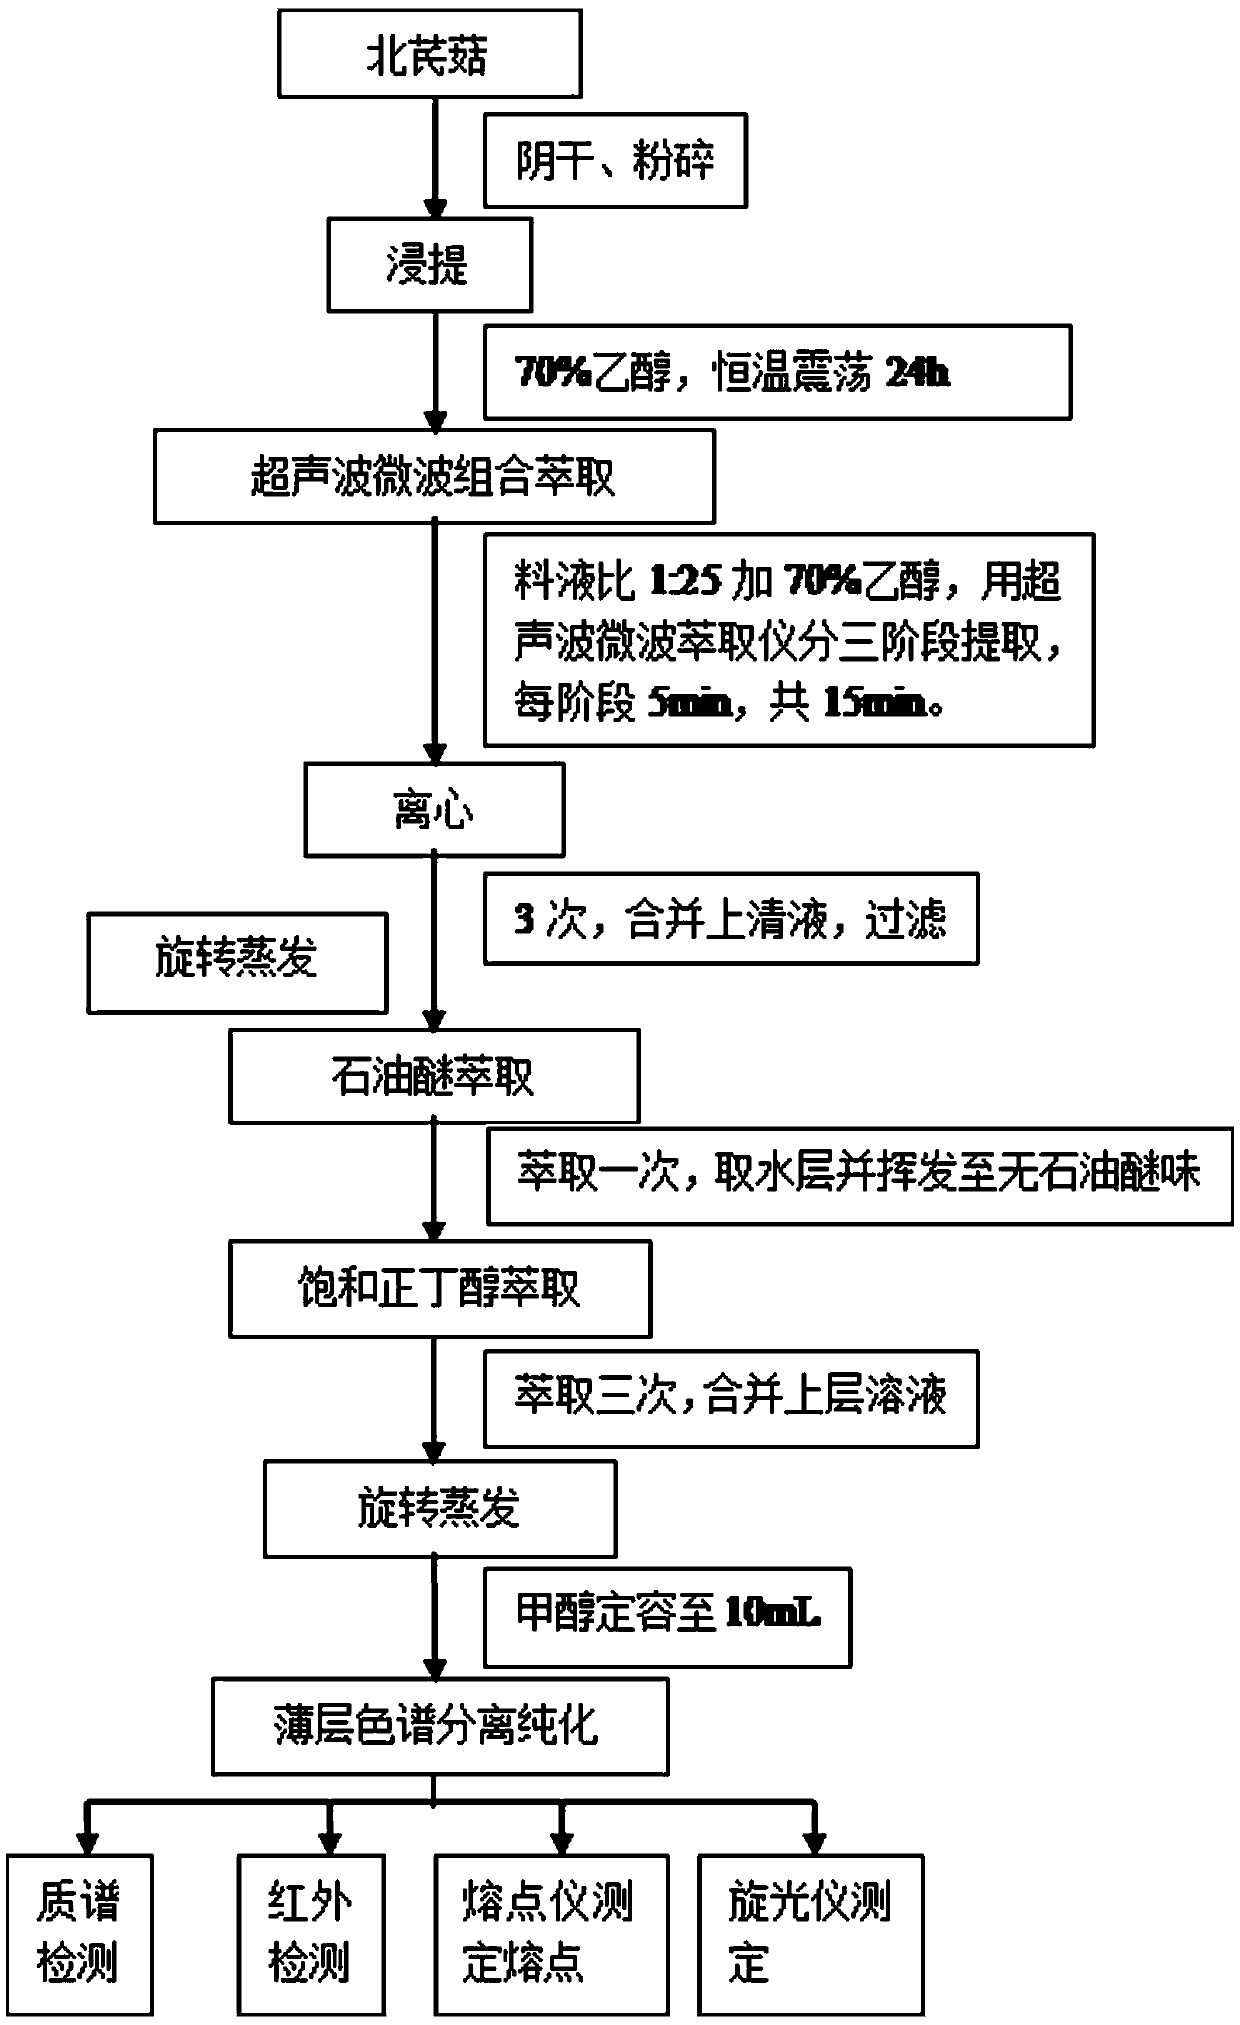 Method for extracting, purifying, and inspecting astragalus in Beiqi mushroom